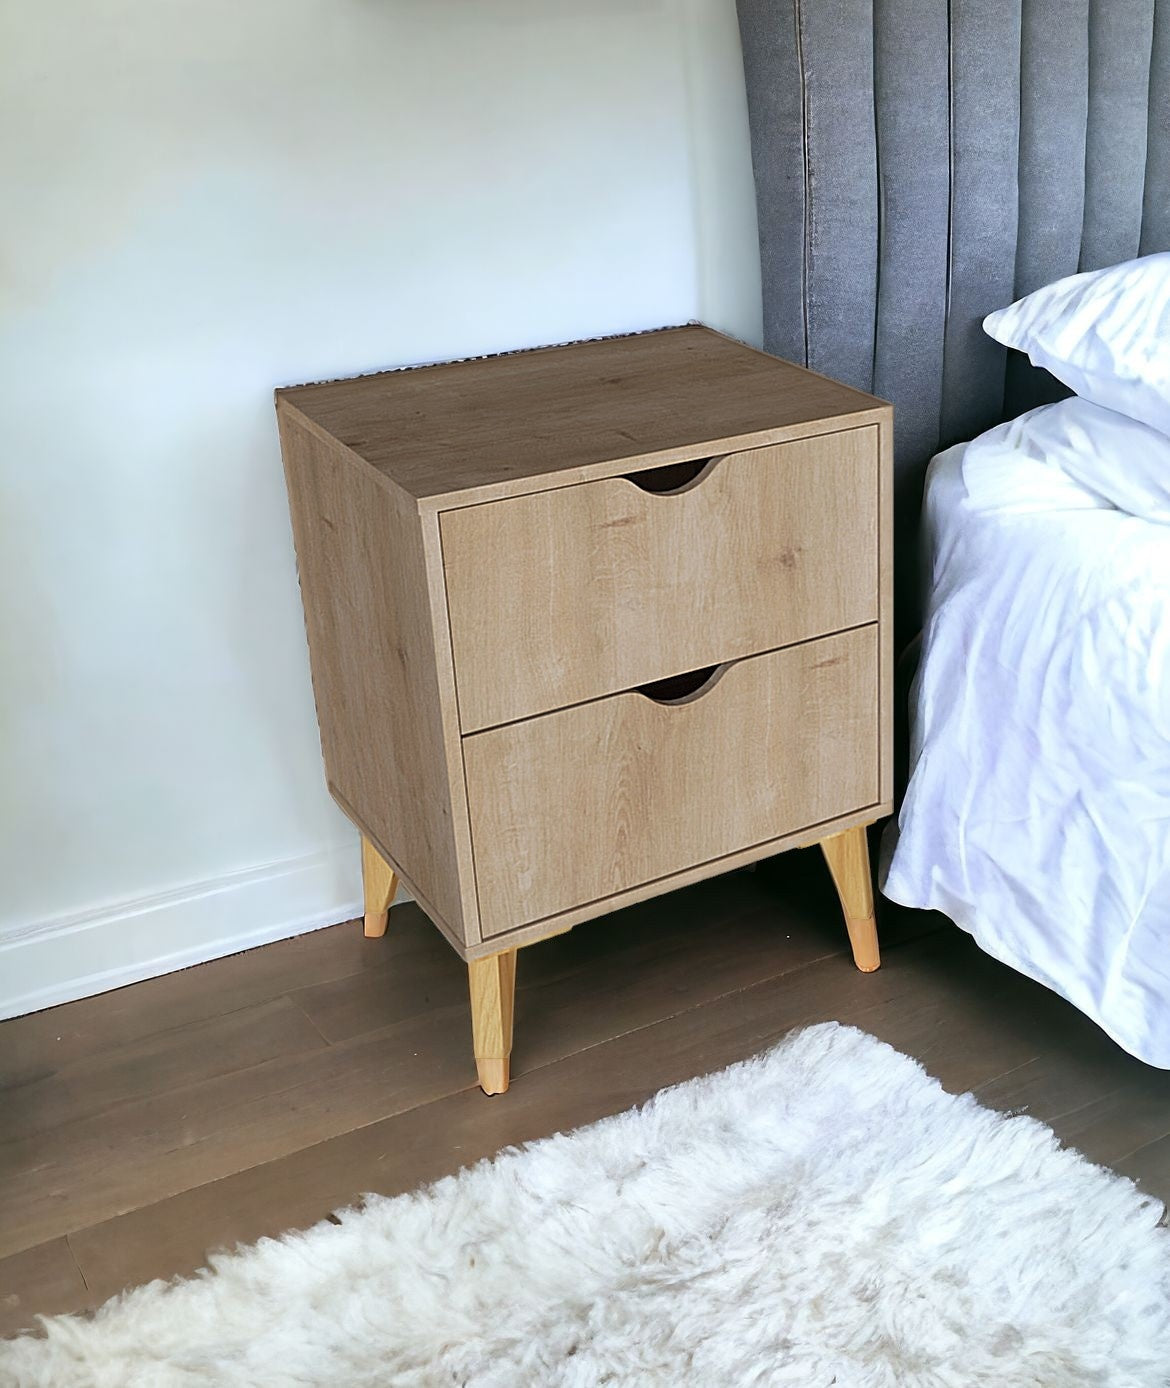 20" Natural Two Drawer Faux Wood Nightstand